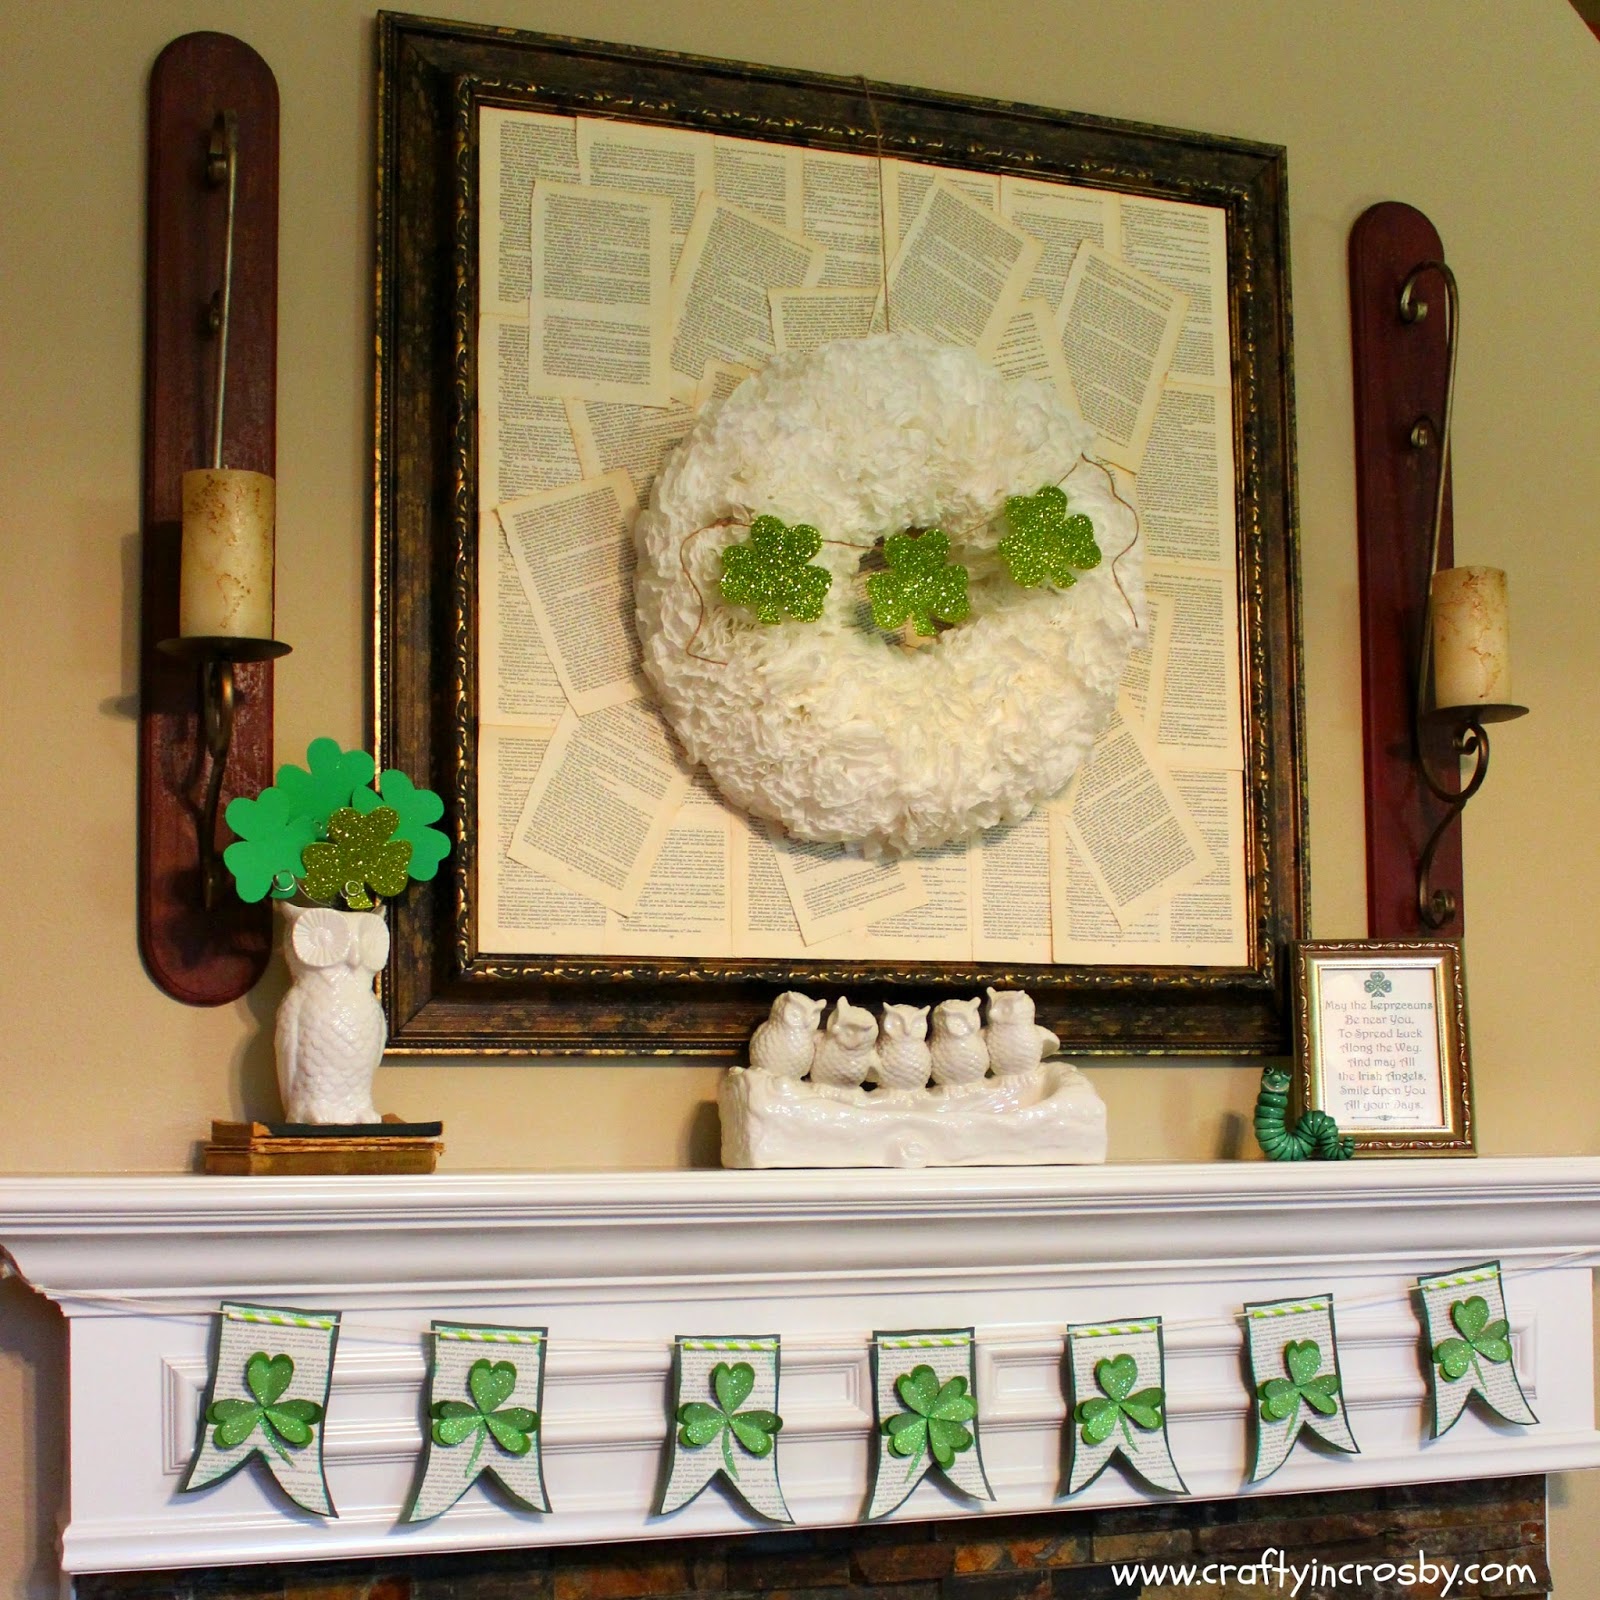 Interchangeable Wreath, March 17, St. Paddy's Day, St Patricks Day, Easy Holiday Decorating